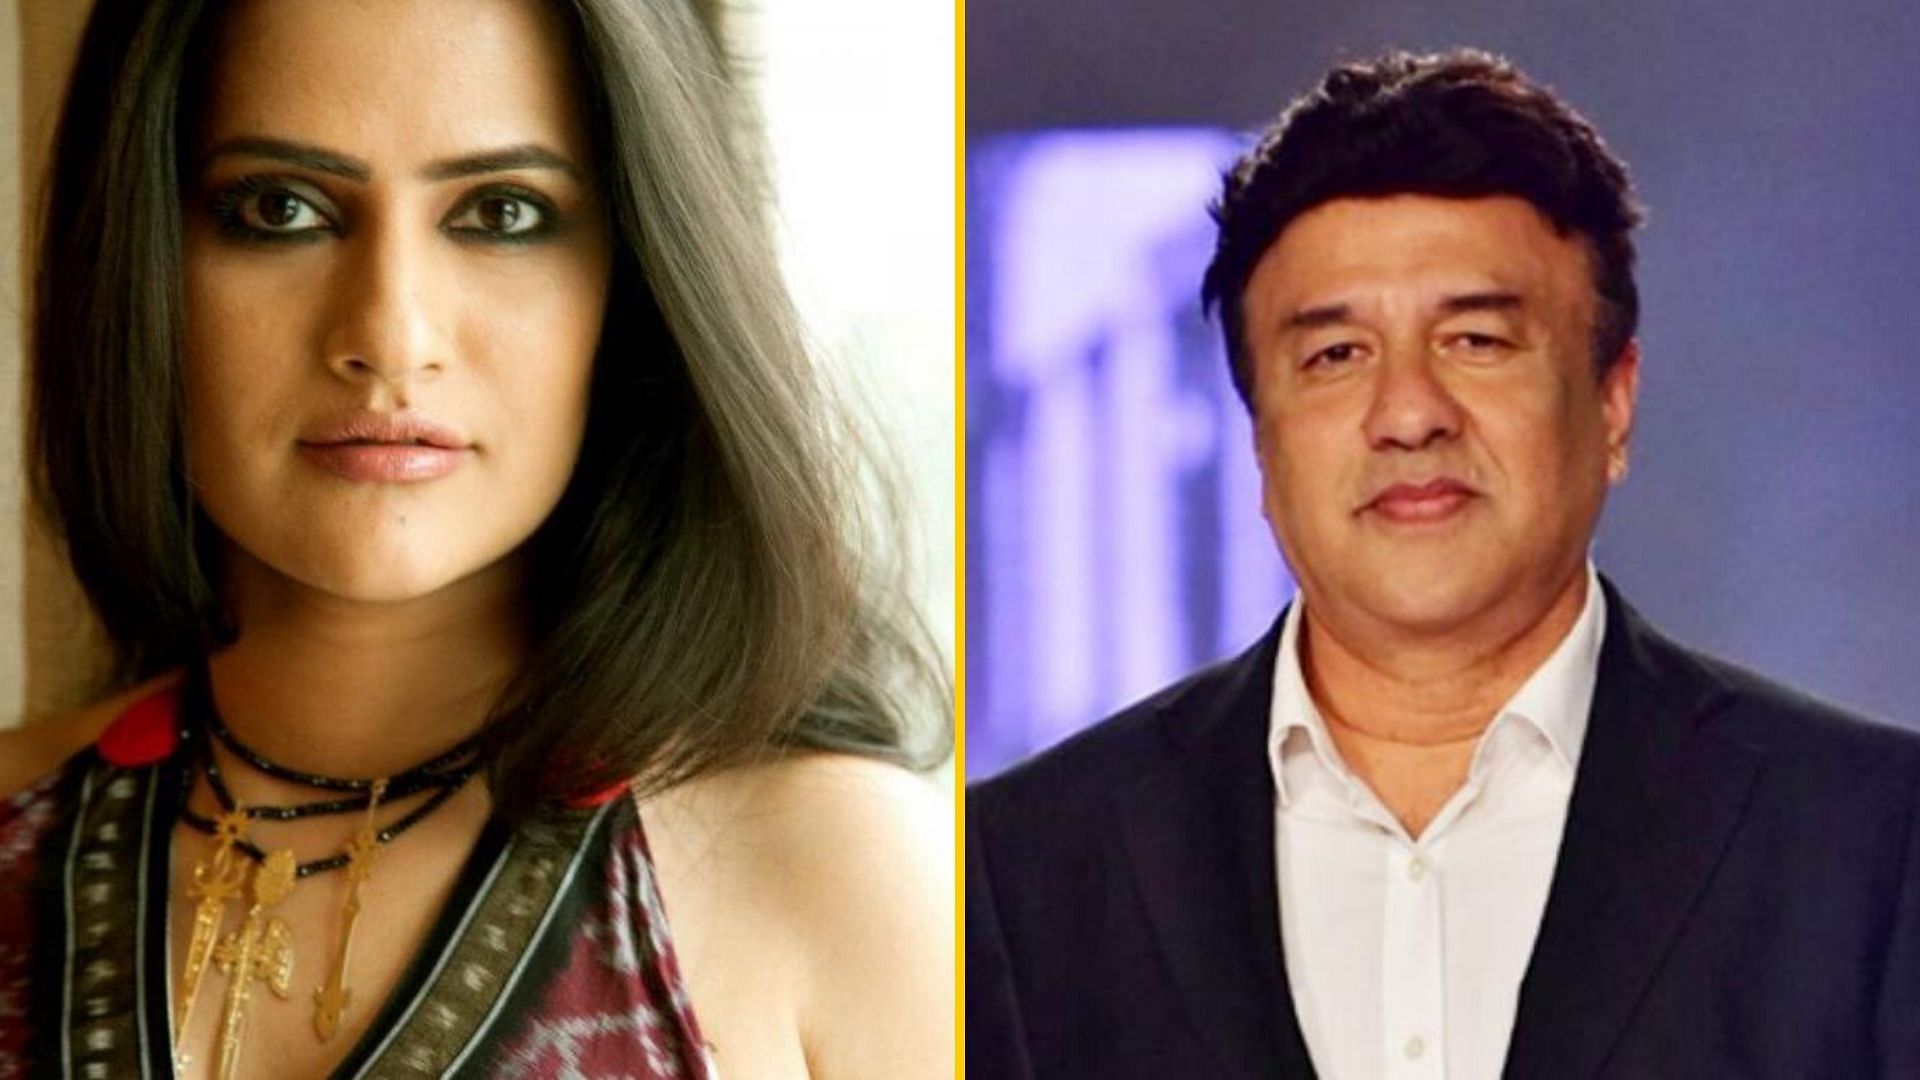 Anu Malik has been accused of sexual harassment by multiple women.